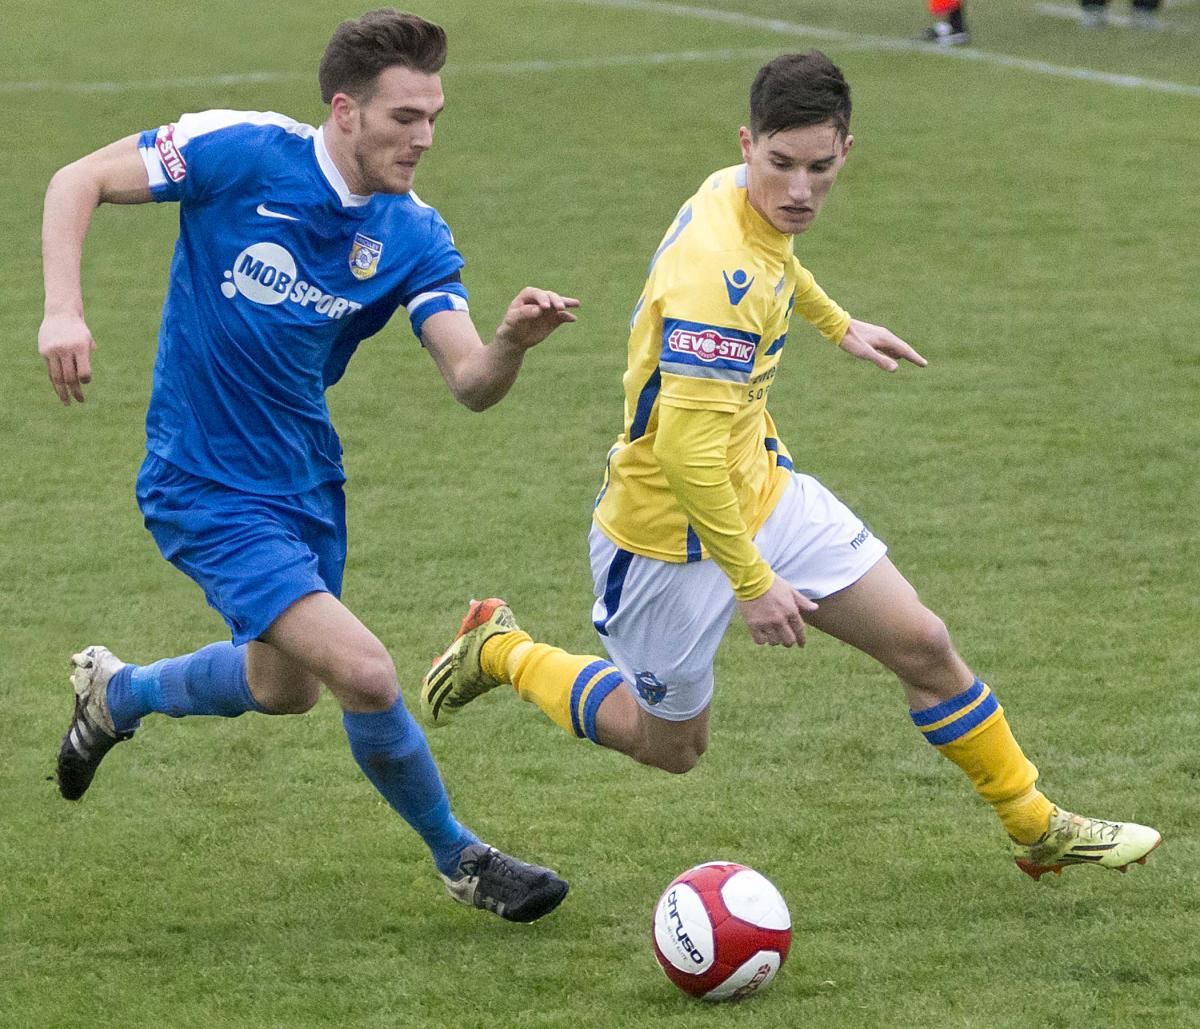 All the action as Warrington Town make it back-to-back victories with a comfortable win at Frickley. Pictures by John Hopkins